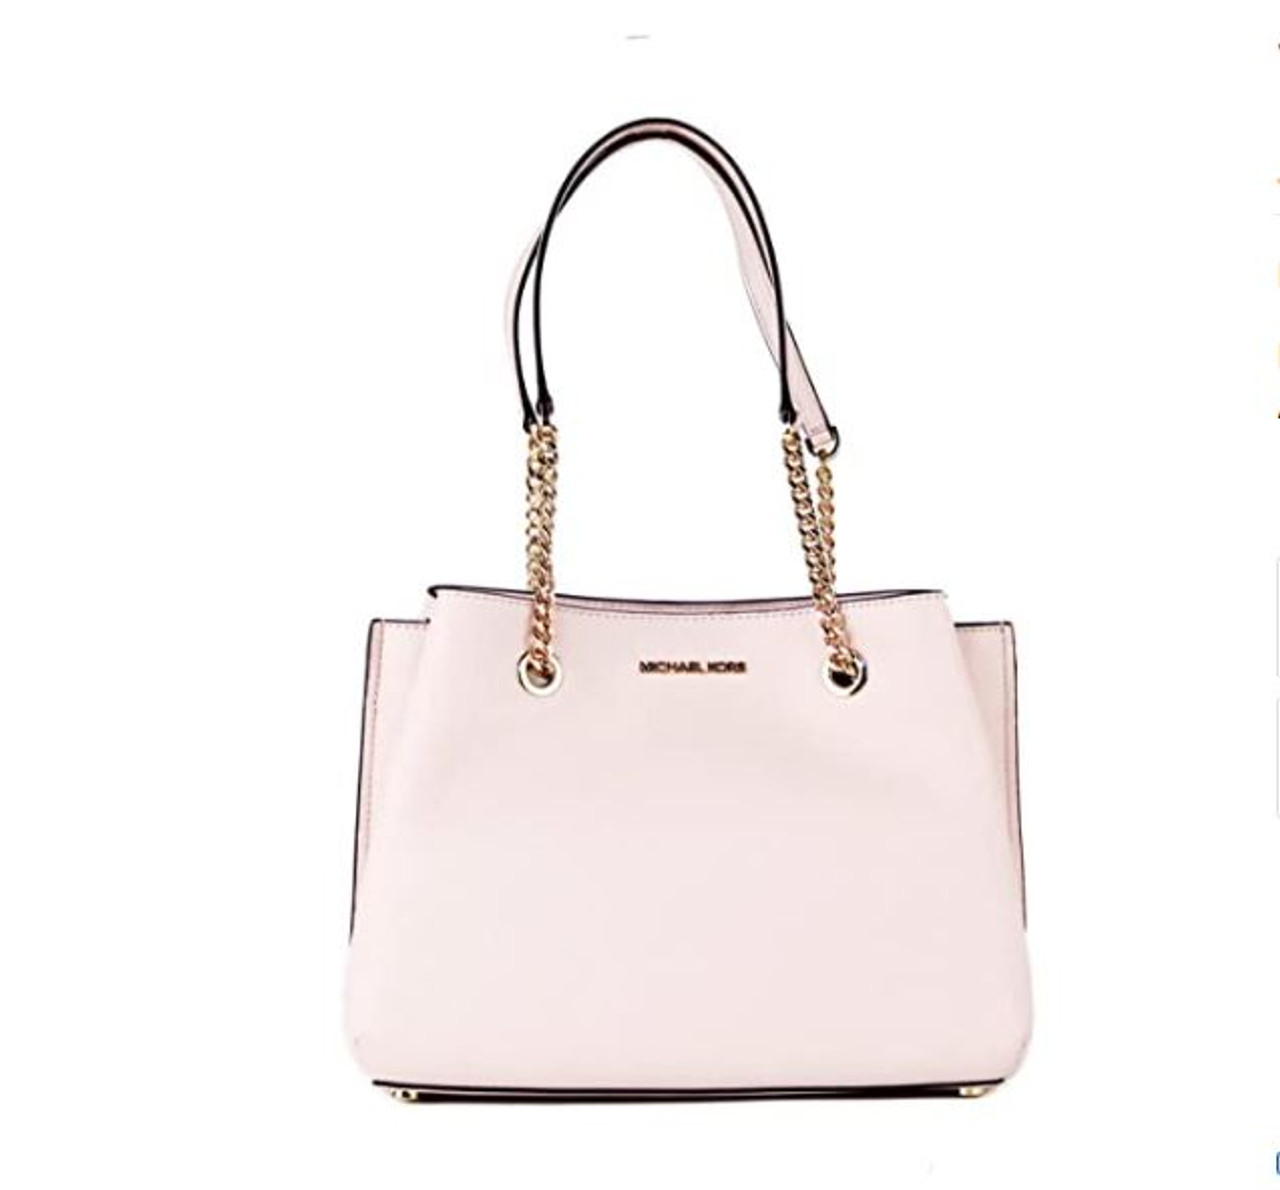 Buy Free Shipping [Michael Kors] Outlet Handbag Hope Shoulder Bag Ladies MICHAEL  KORS 35T0GWXM2L (6) POWDER BLUSH [Parallel imports] from Japan - Buy  authentic Plus exclusive items from Japan